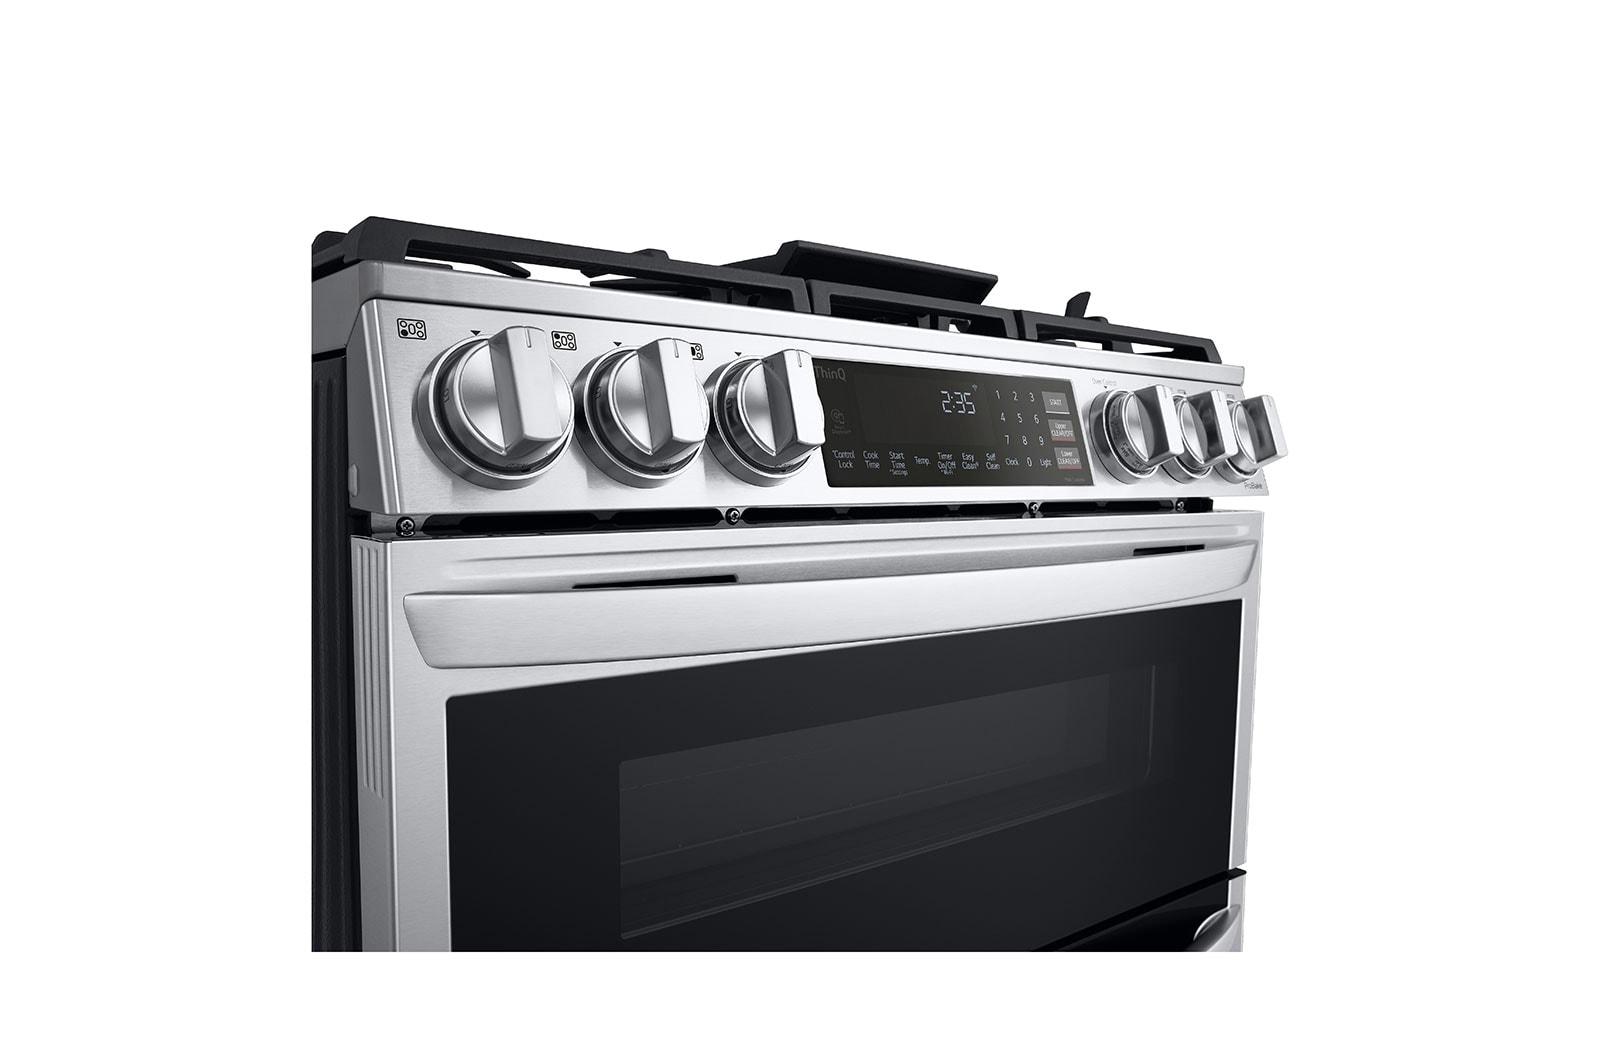 Lg 6.9 cu. ft. Smart Gas Double Oven Slide-in Range with InstaView®, ProBake® Convection, Air Fry, and Air Sous Vide